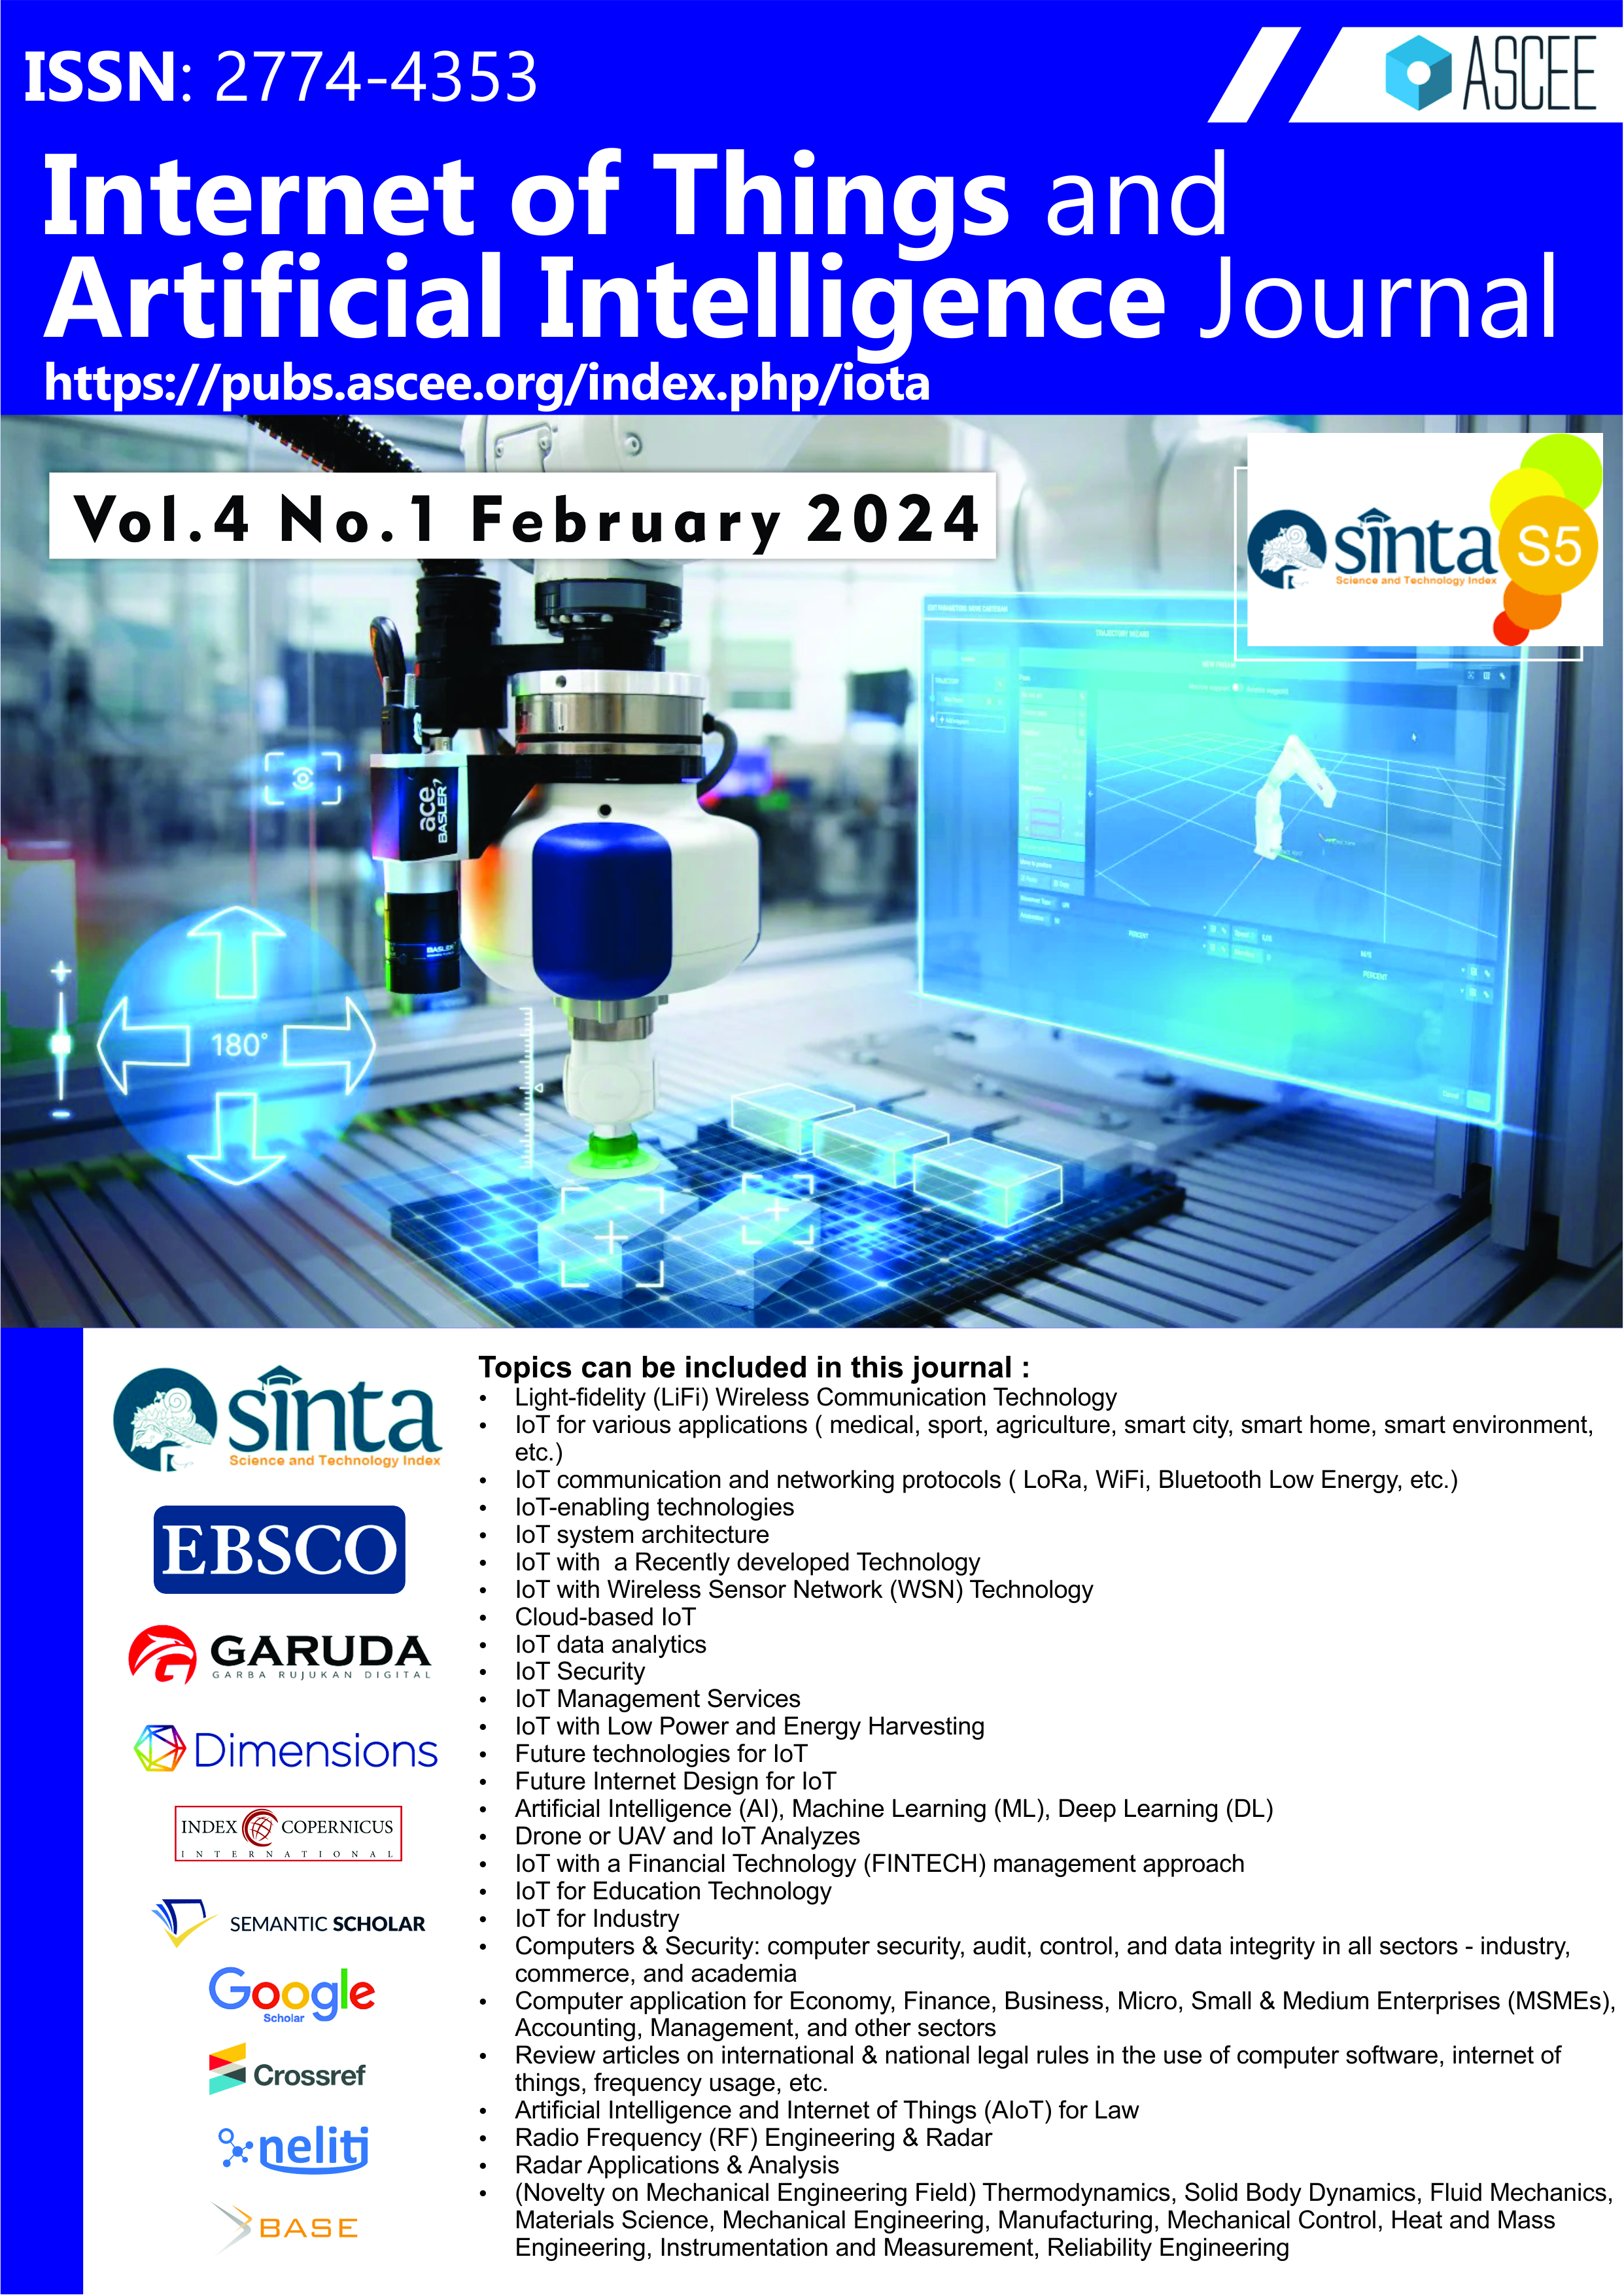 					View Vol. 4 No. 1 (2024): Volume 4 Issue 1, 2024 [February]
				